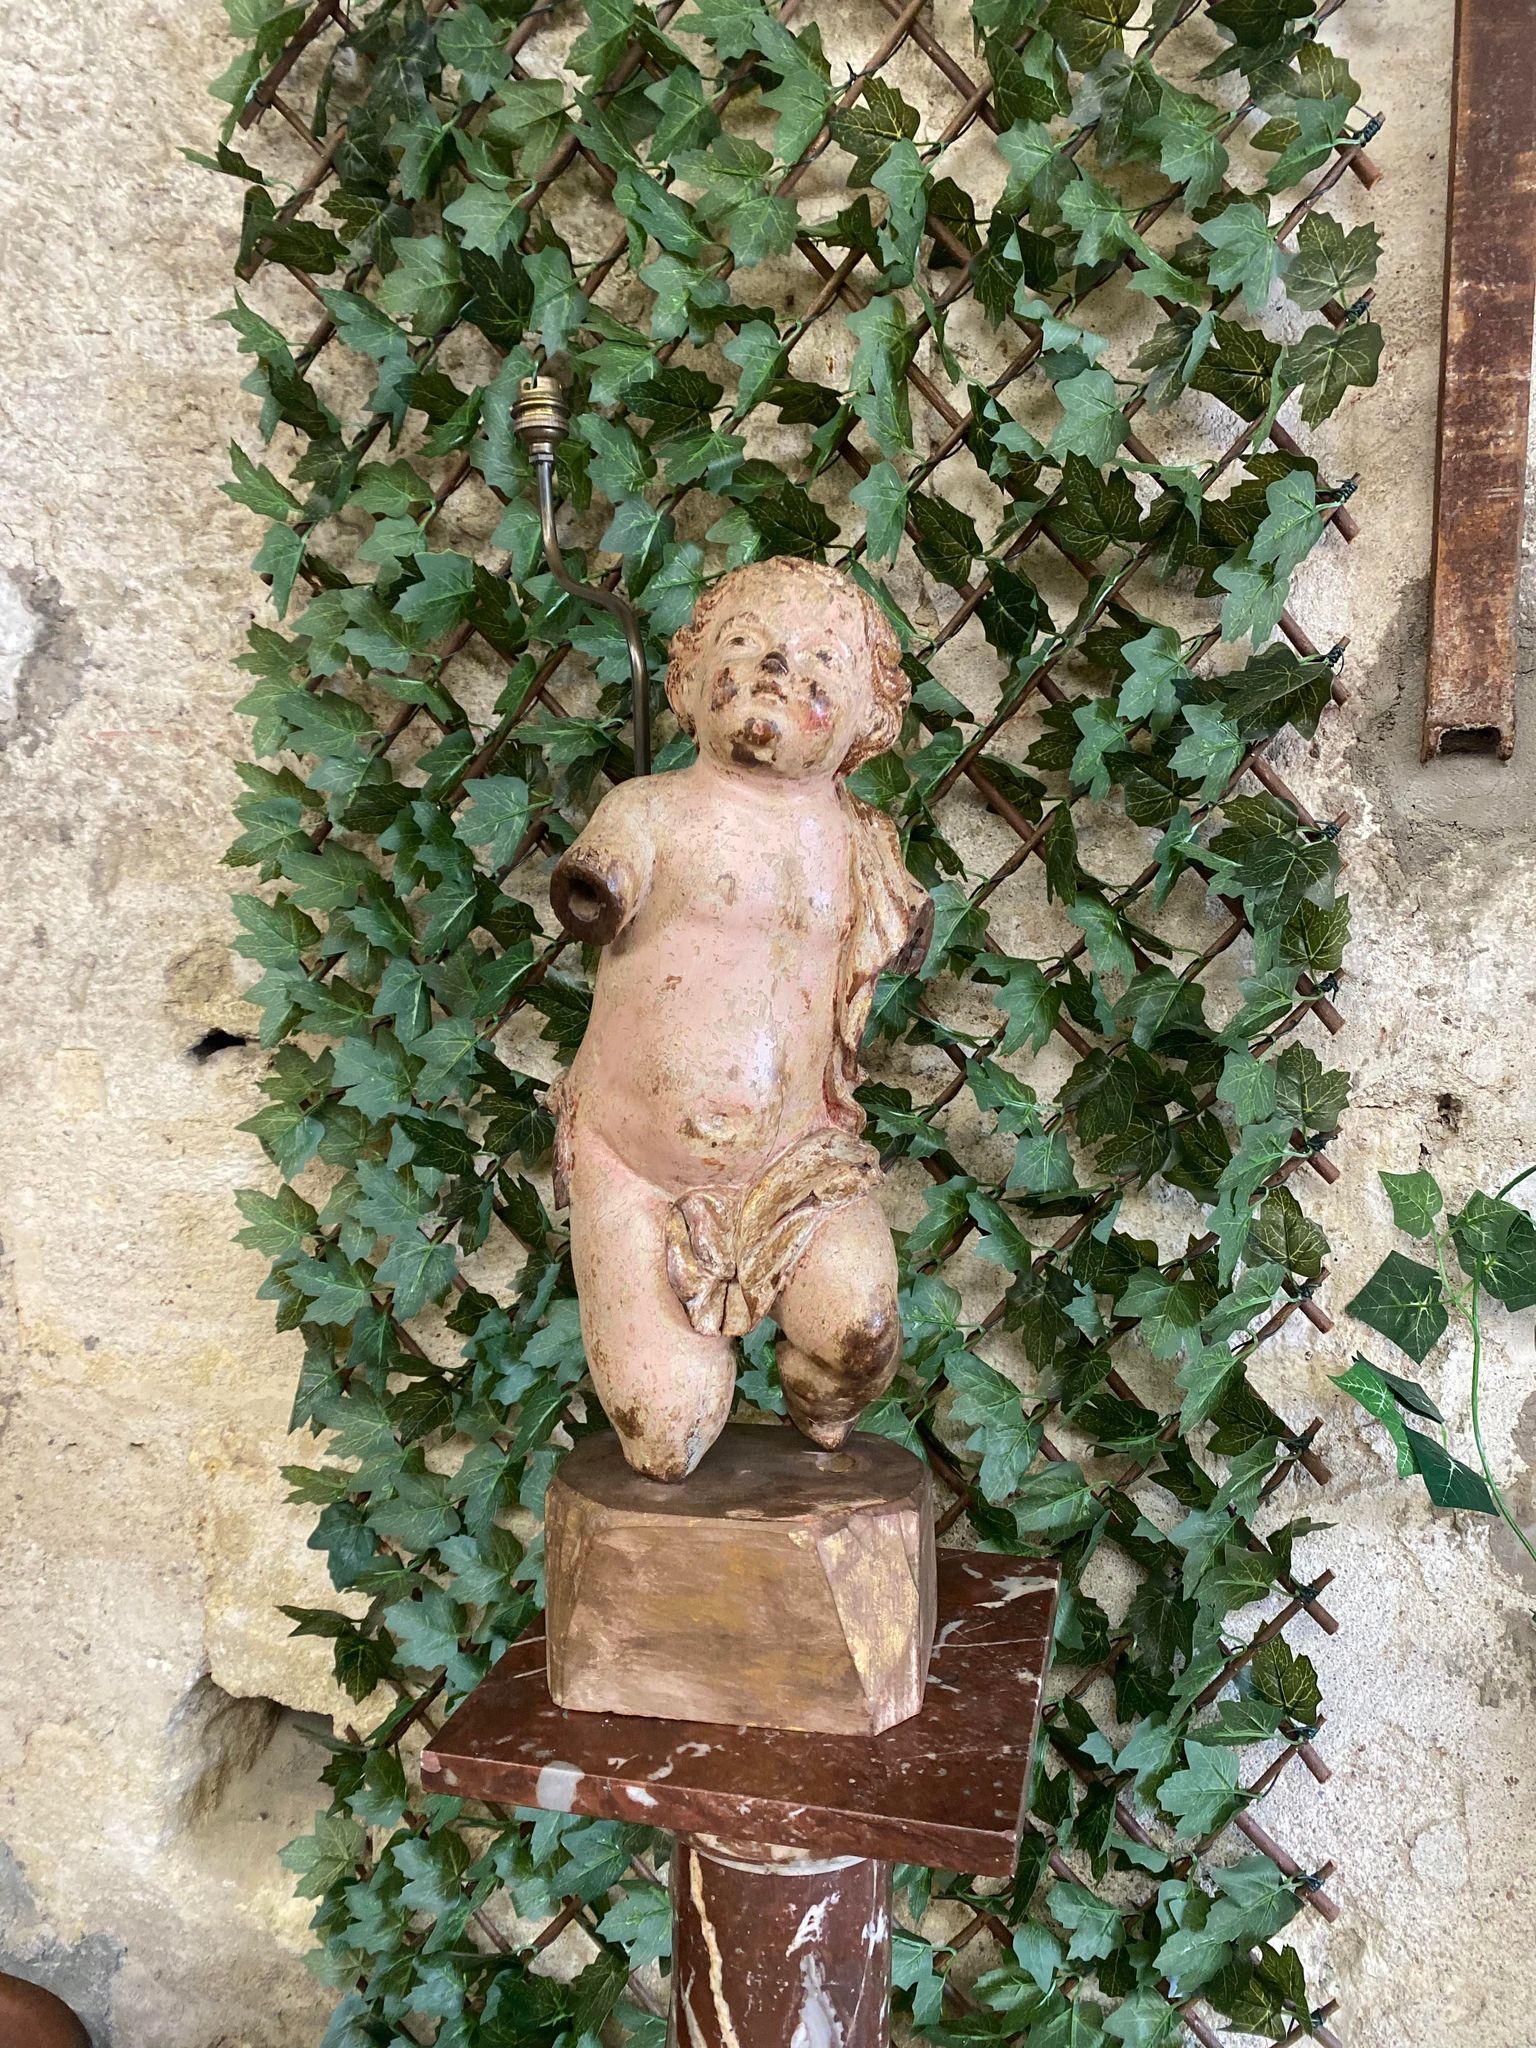 This Antique Angel Sculpture Lamp is of French Origin from the 18th century.

This Beautiful Cherub was an original church carving, later mounted as a table lamp. 

The figure is of Polychromed Wood with Beautiful Carved Details

Electric EU not